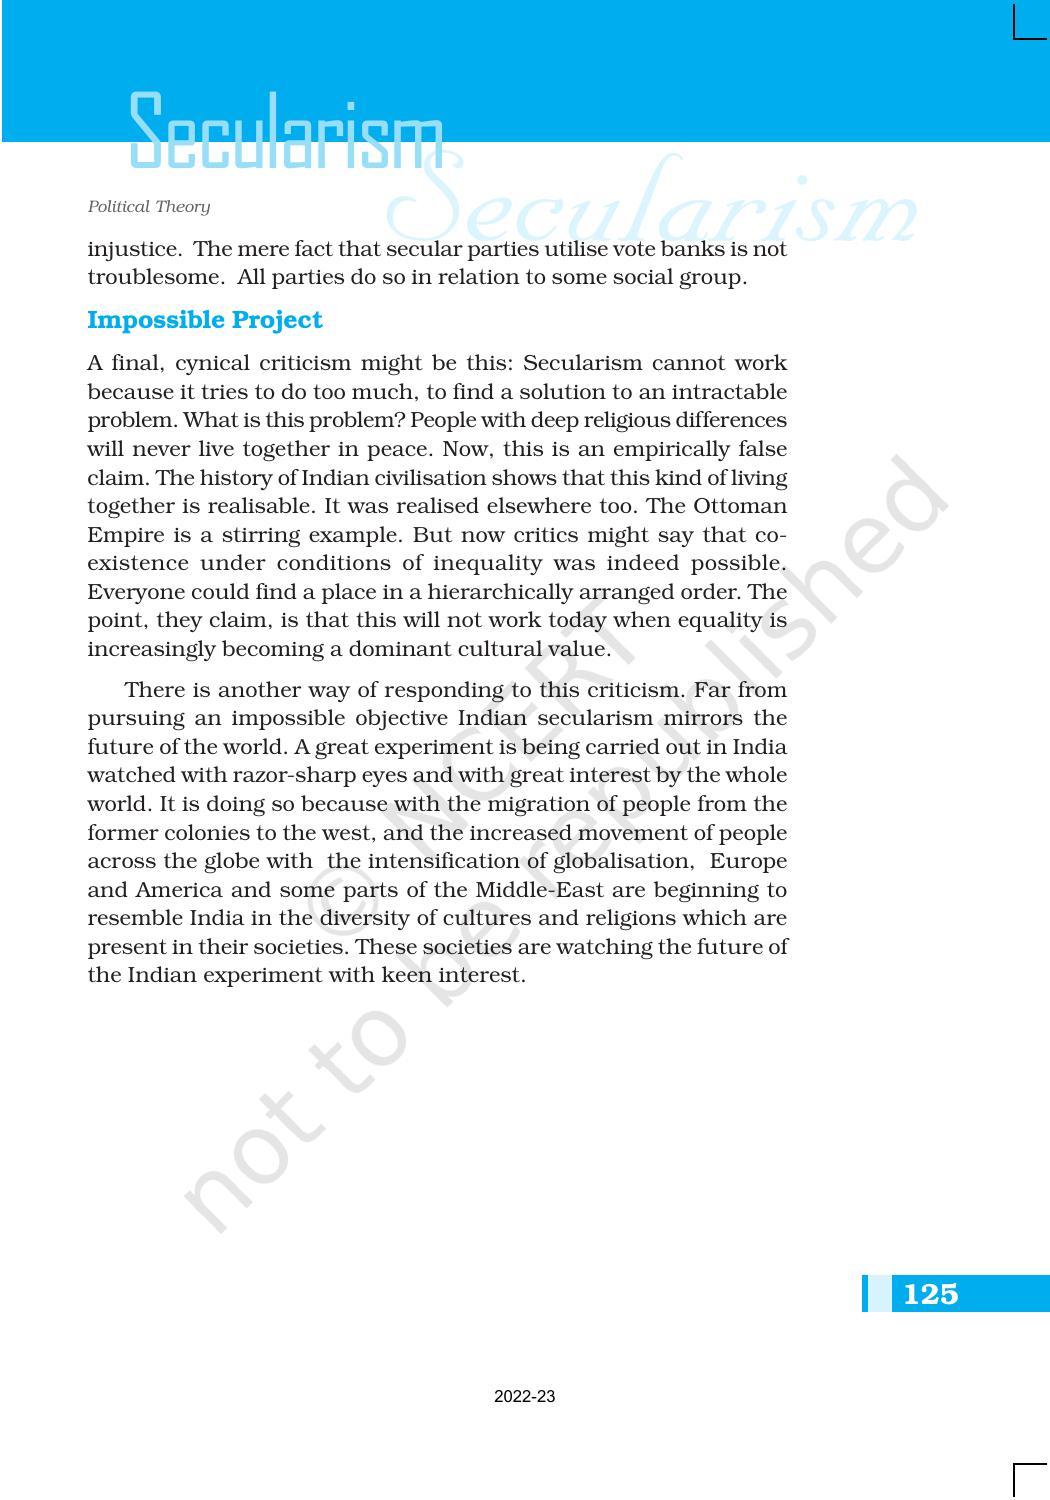 NCERT Book for Class 11 Political Science (Political Theory) Chapter 8 Secularism - Page 15